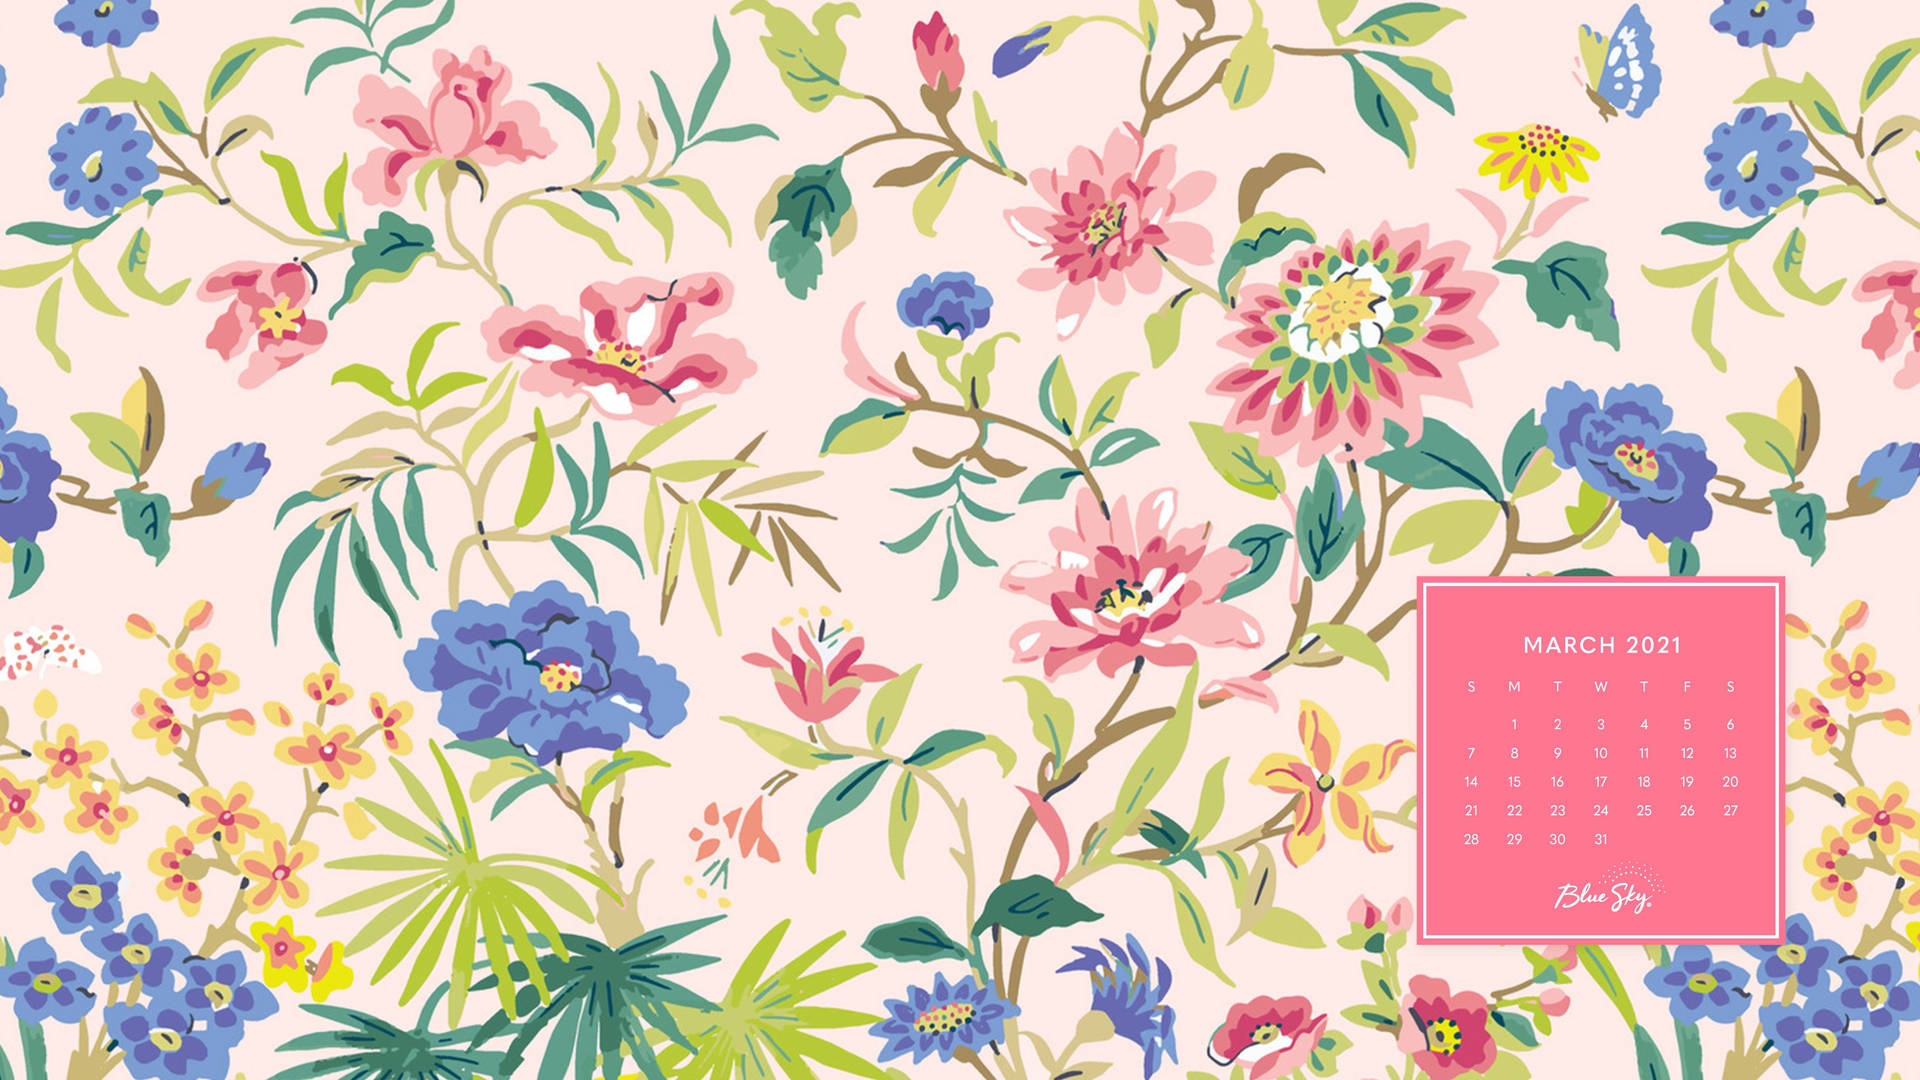 March Calendar With Floral Design Wallpaper